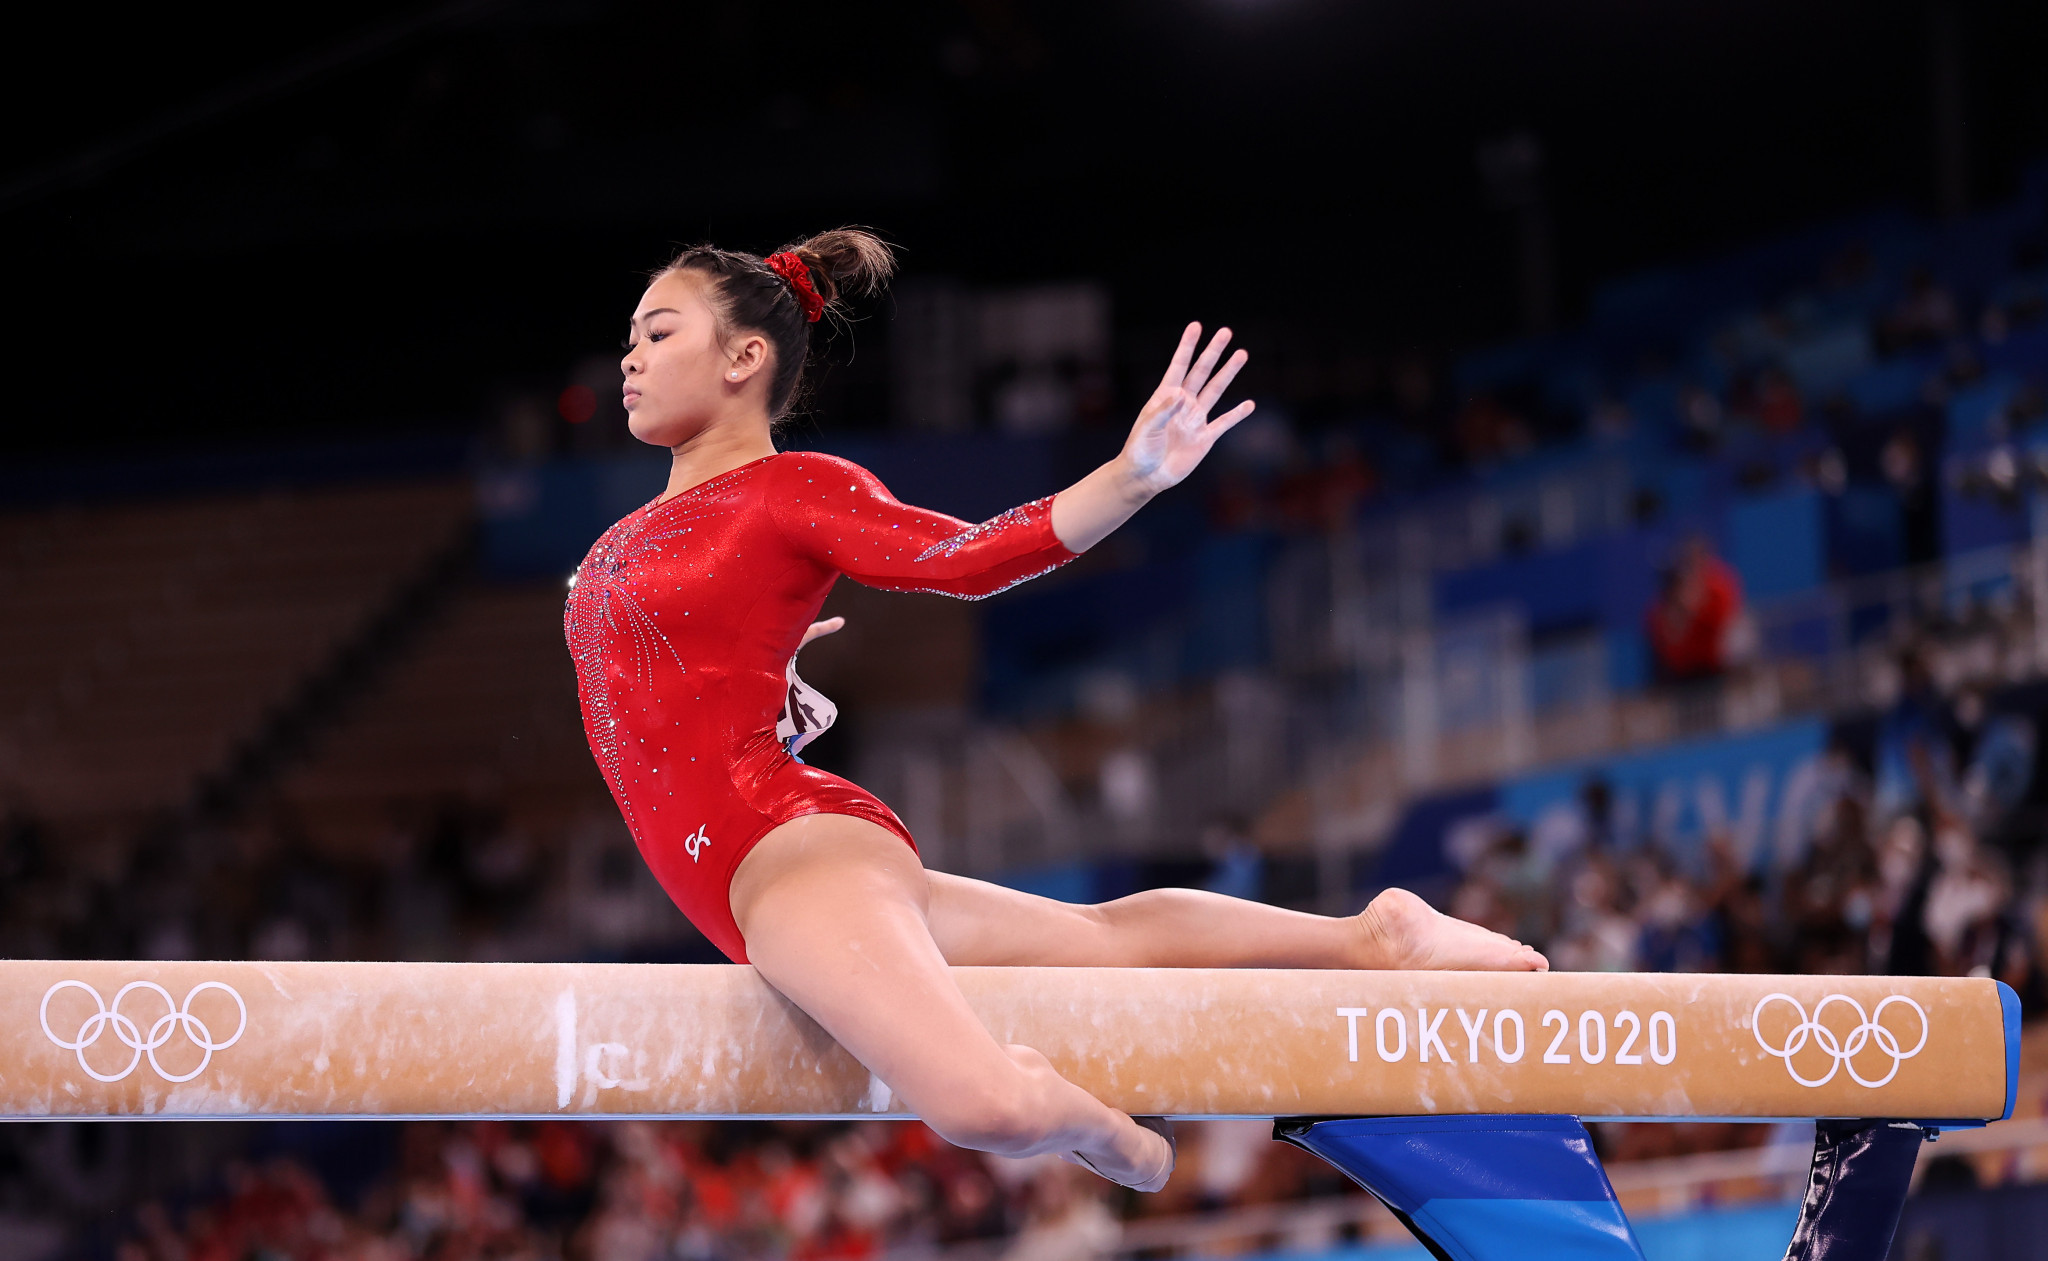 The United States' all-around Olympic champion Sunisa Lee triumphed in the balance beam at the NCAA Women's Gymnastics Championships ©Getty Images